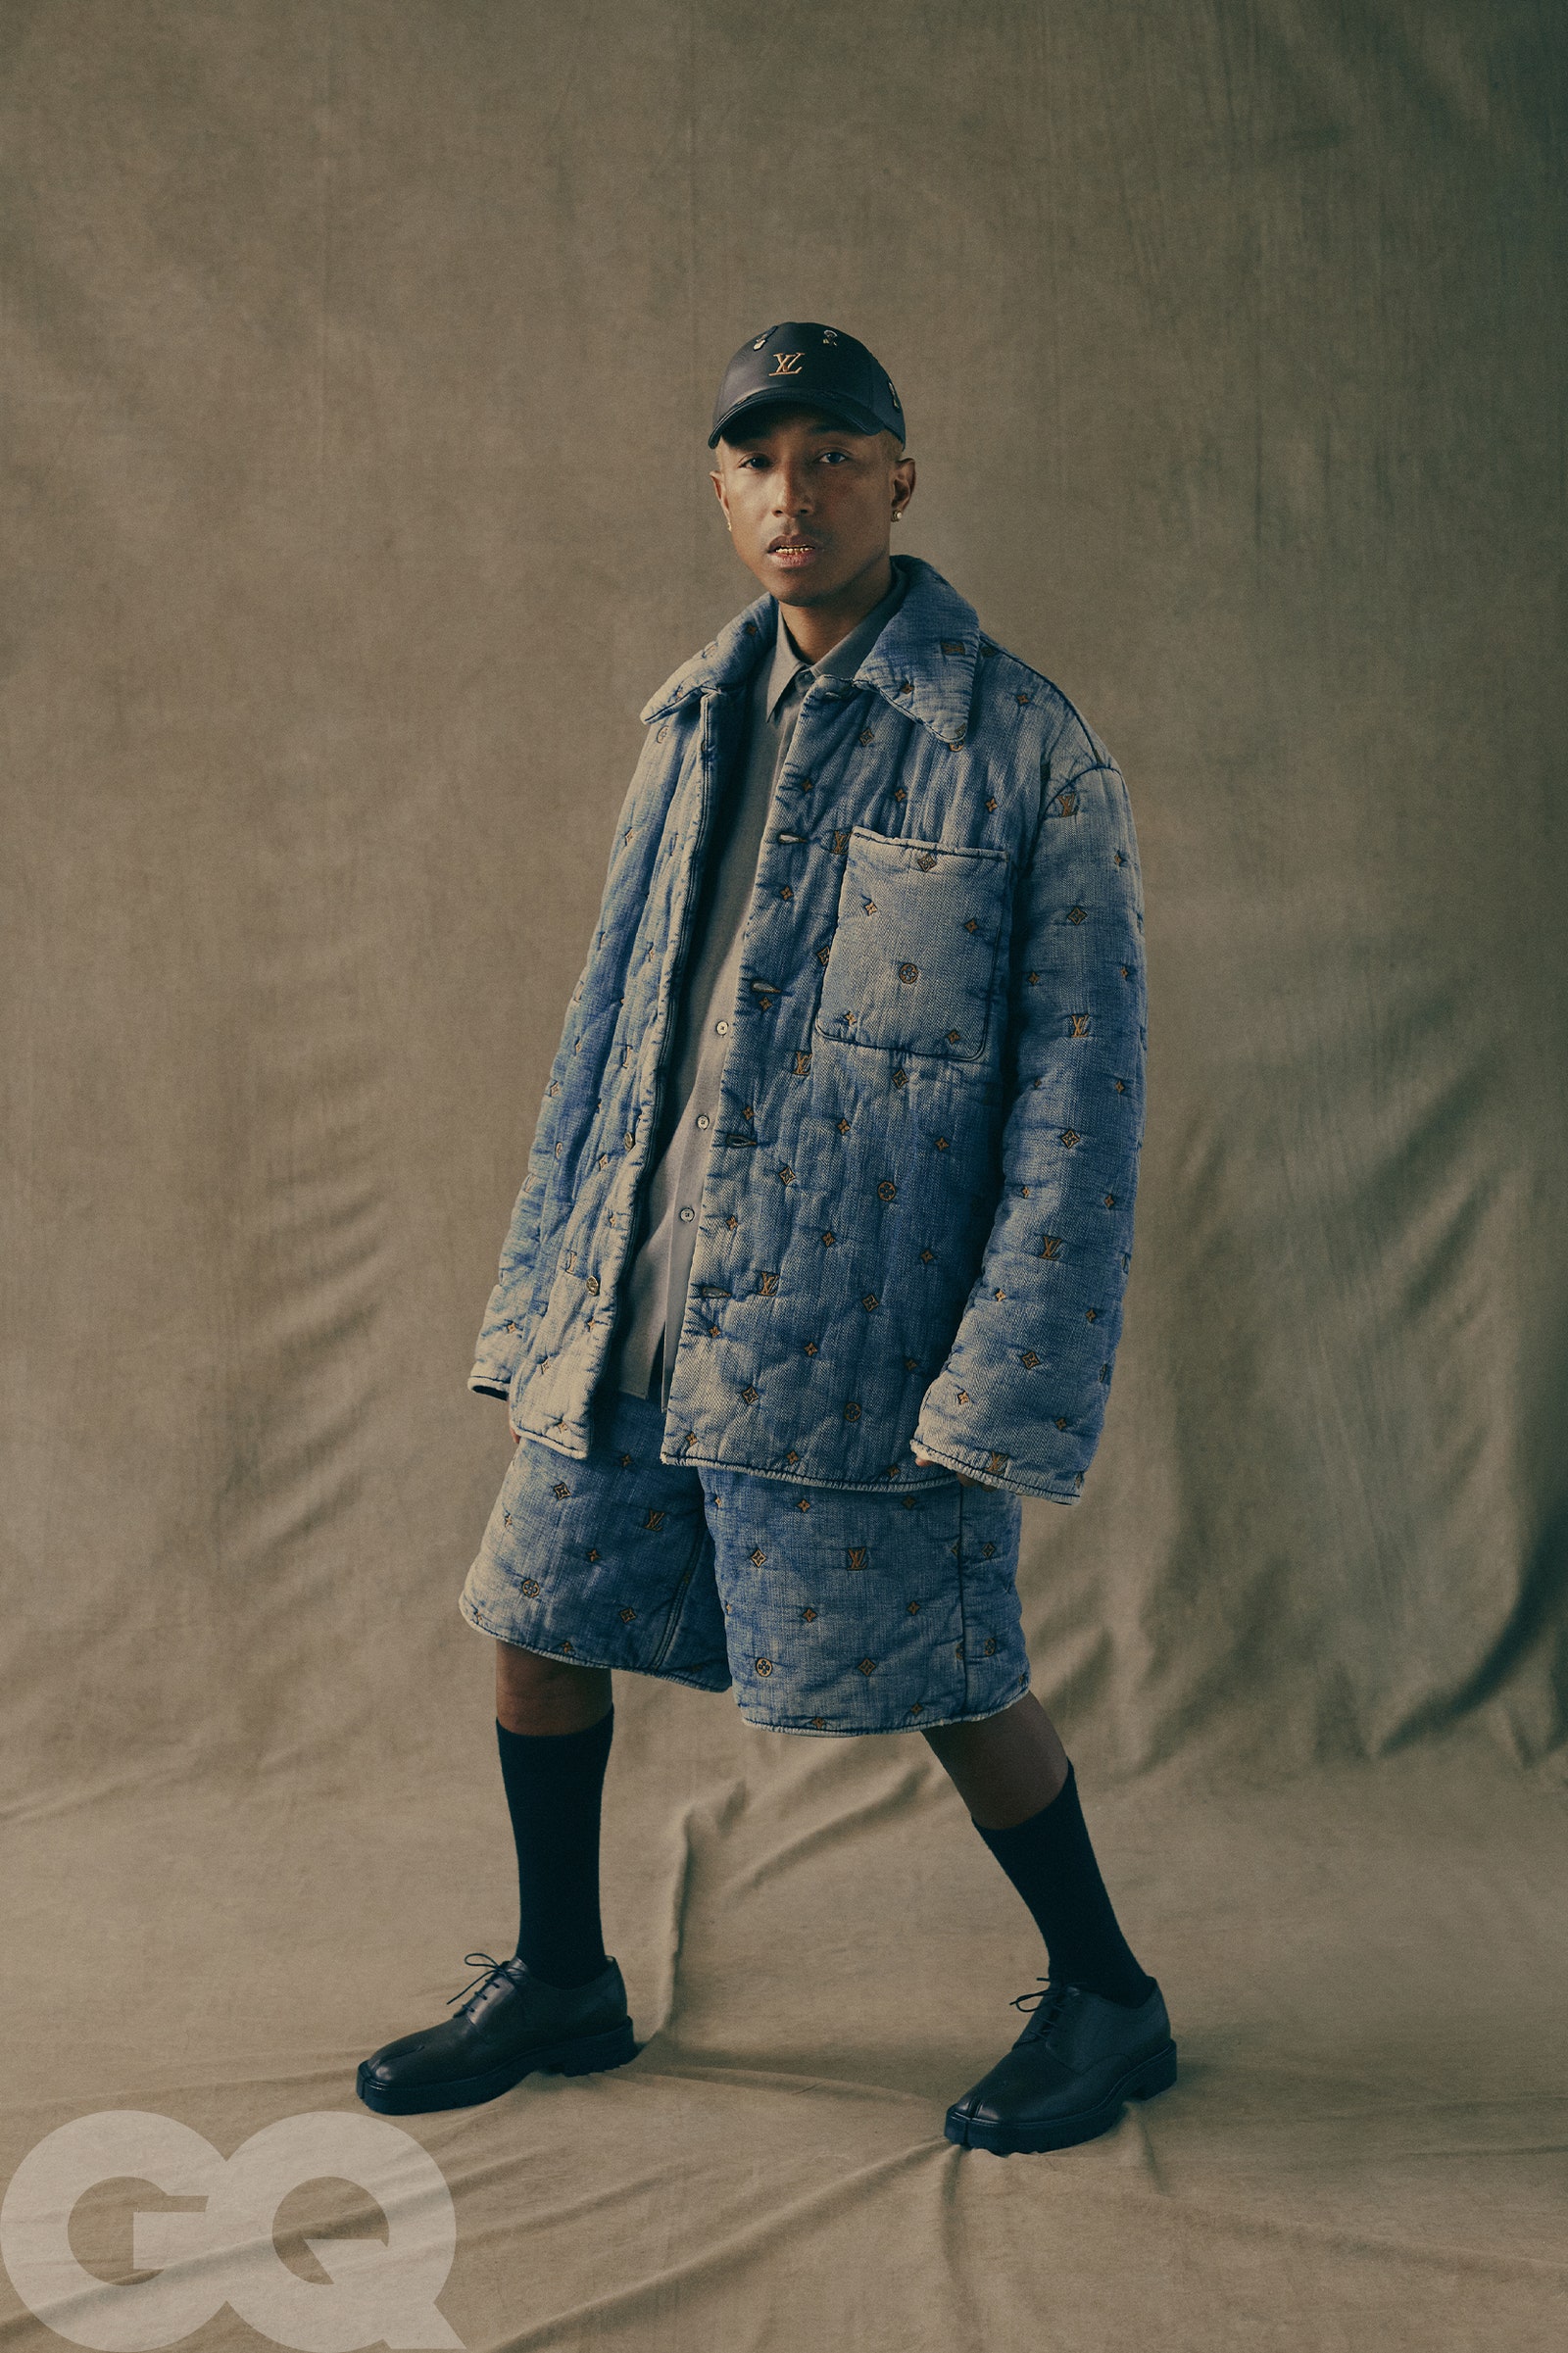 Jacket shorts and hat by Louis Vuitton Mens. Shirt by Auralee. Shoes by Maison Margiela. Socks by Falke.